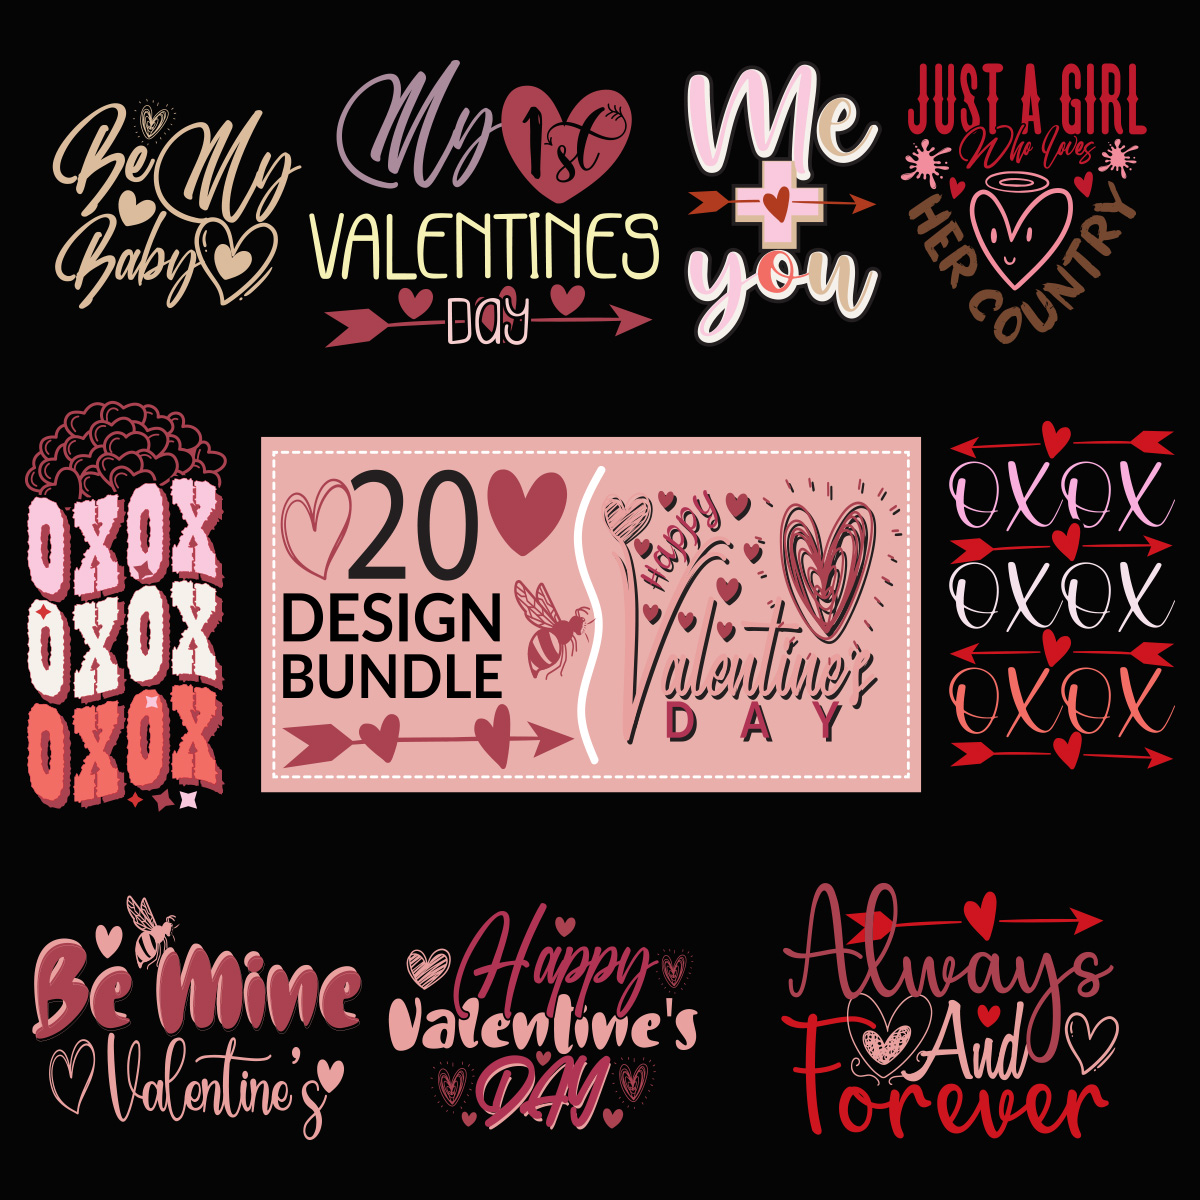 Retro Valentine's Day Pink Sublimation T-Shirt Design cover image.